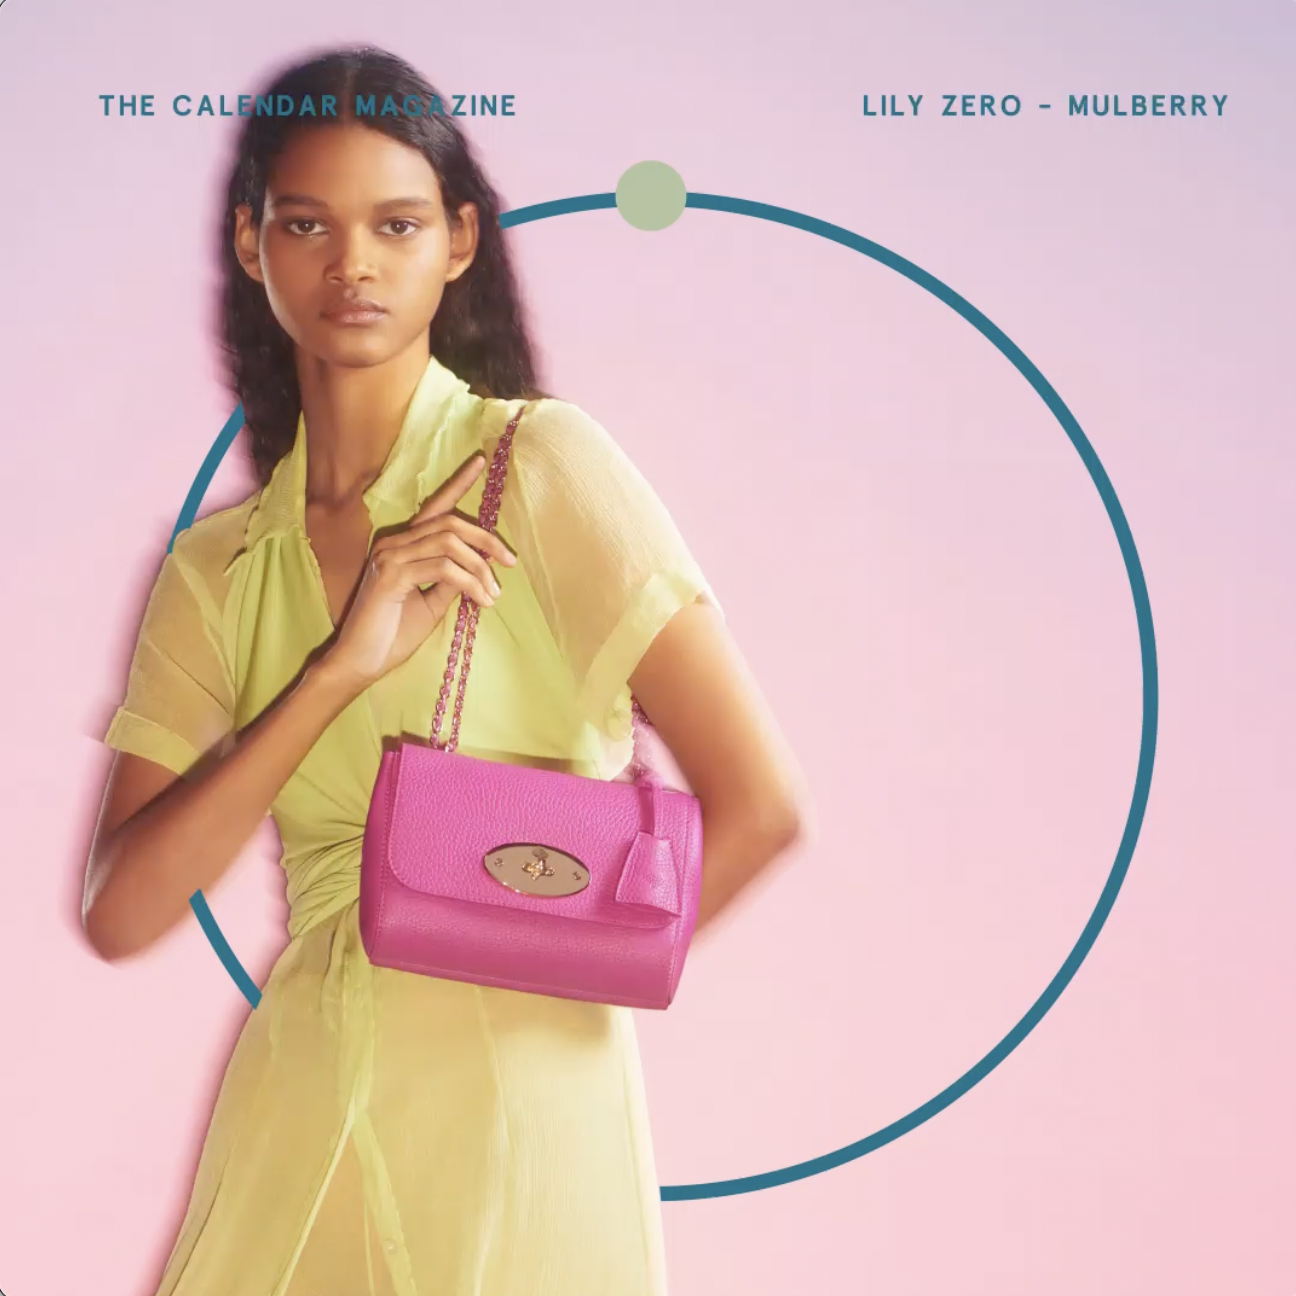  Mulberry Introduces Lily Zero, Its First Carbon Neutral Range